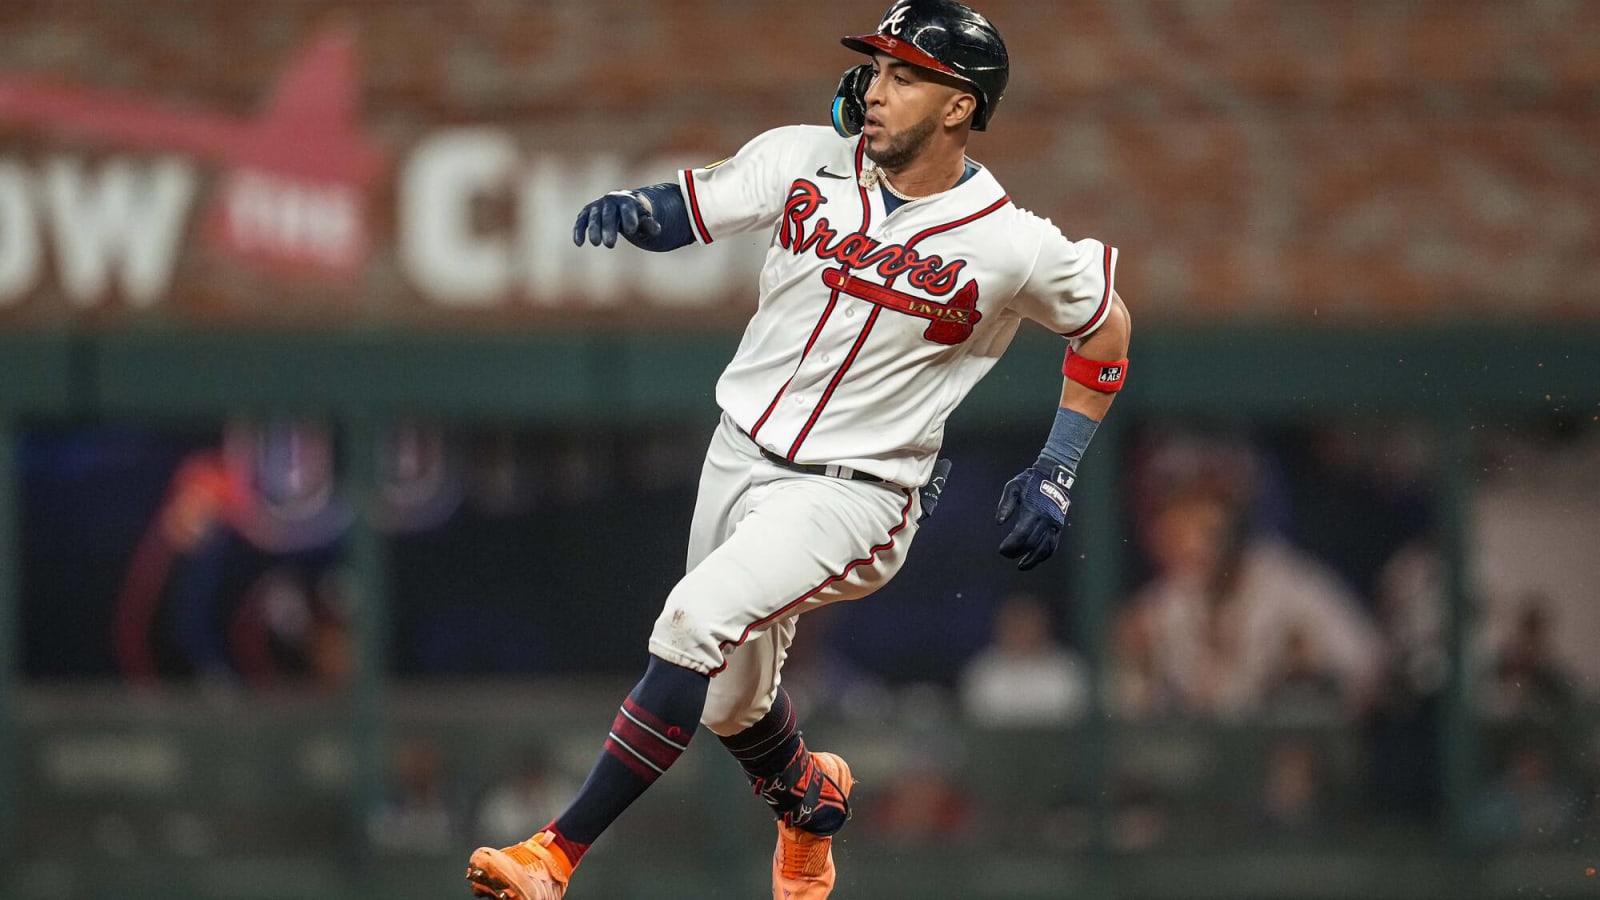 Eddie Rosario heating up is exactly what the Braves offense needed